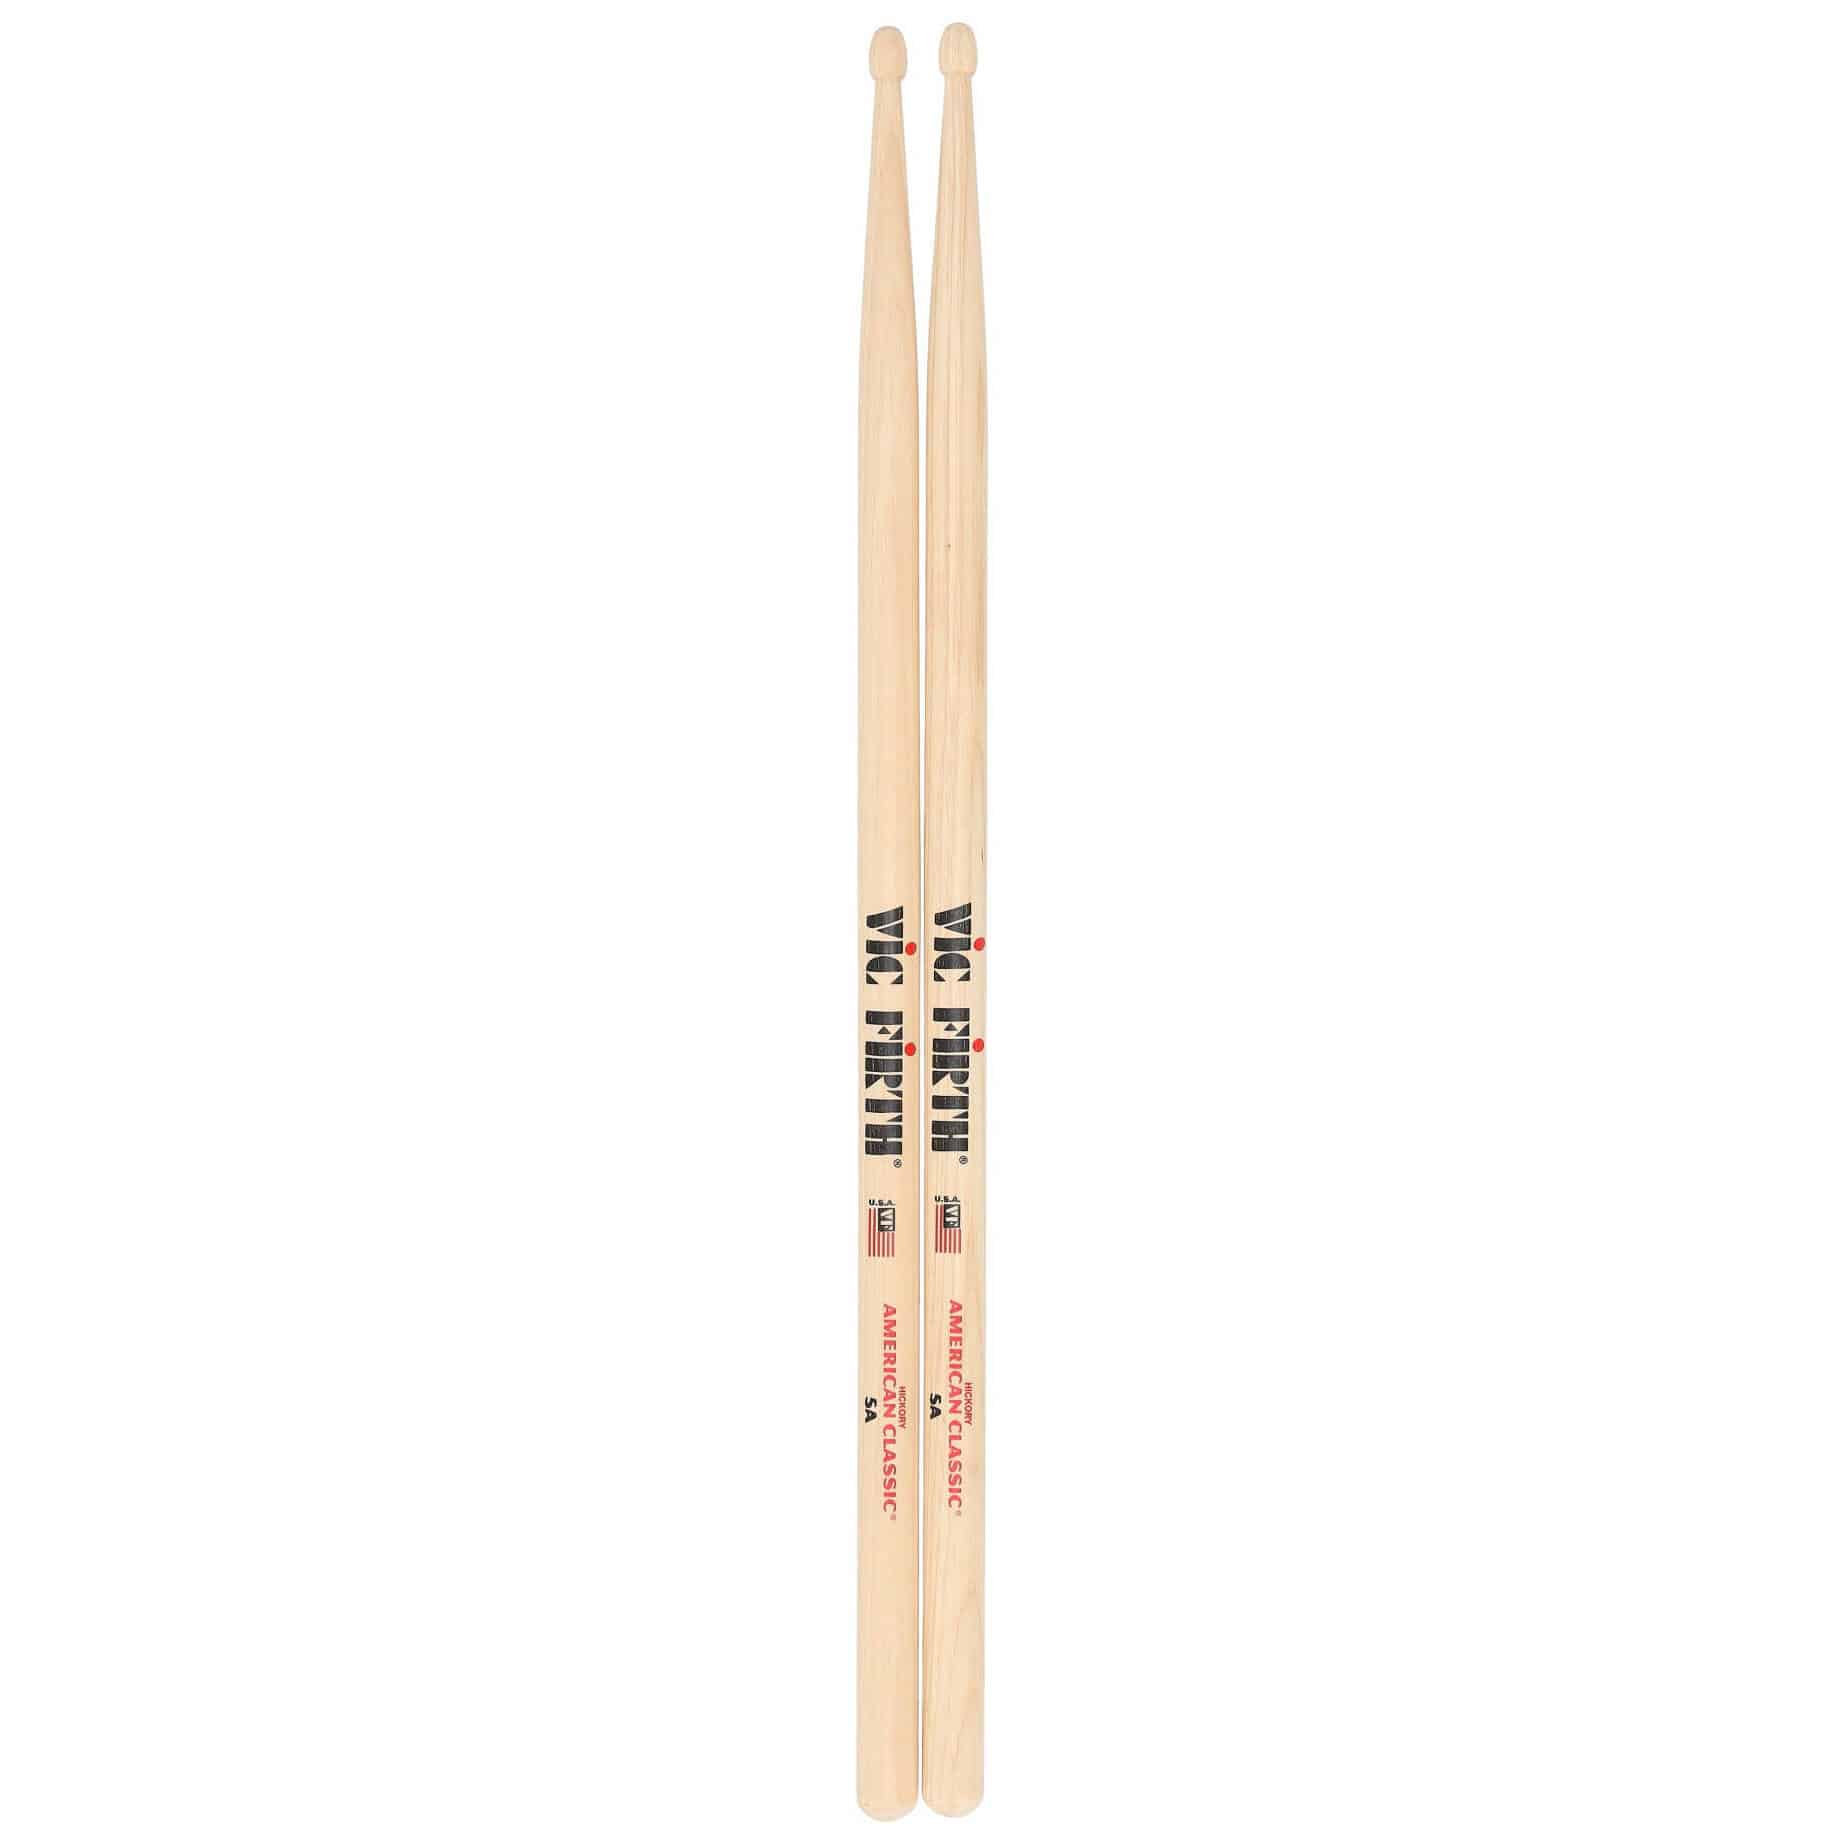 Vic Firth 5A - American Classic - Hickory - Wood Tip